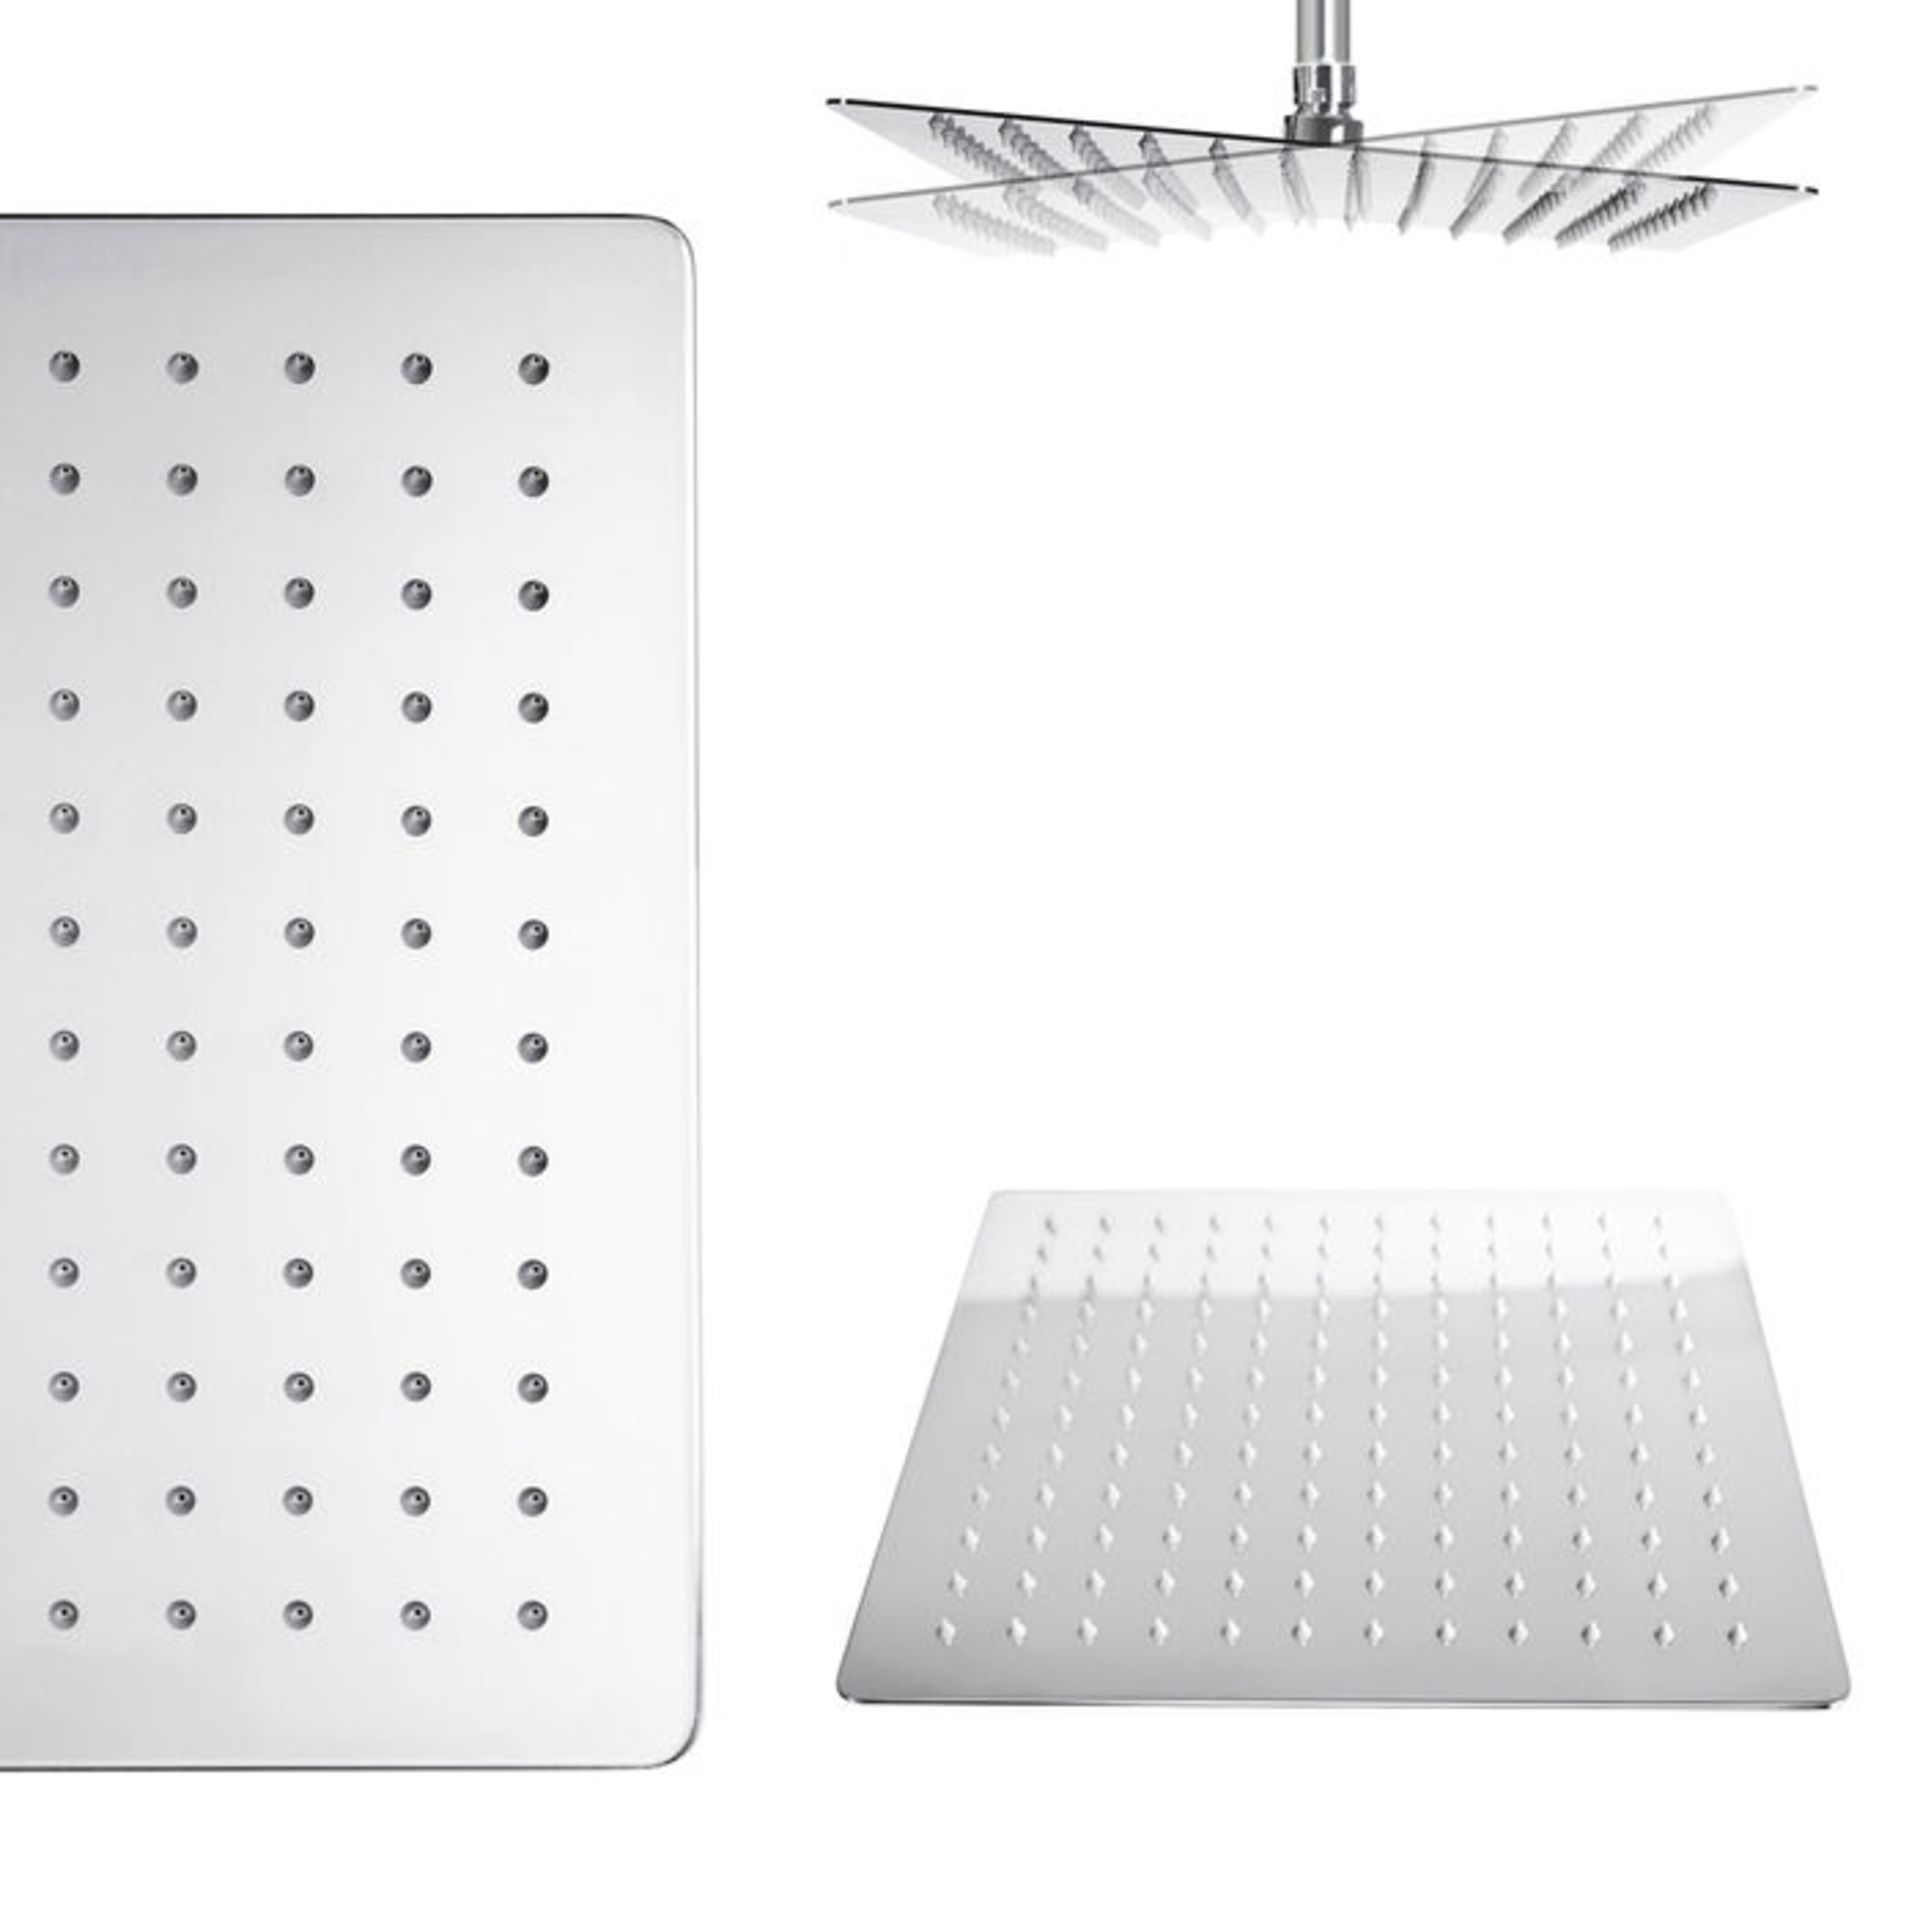 (LX19) Stainless Steel 300mm Square Shower Head Solid metal structure Can be wall or ceiling mounted